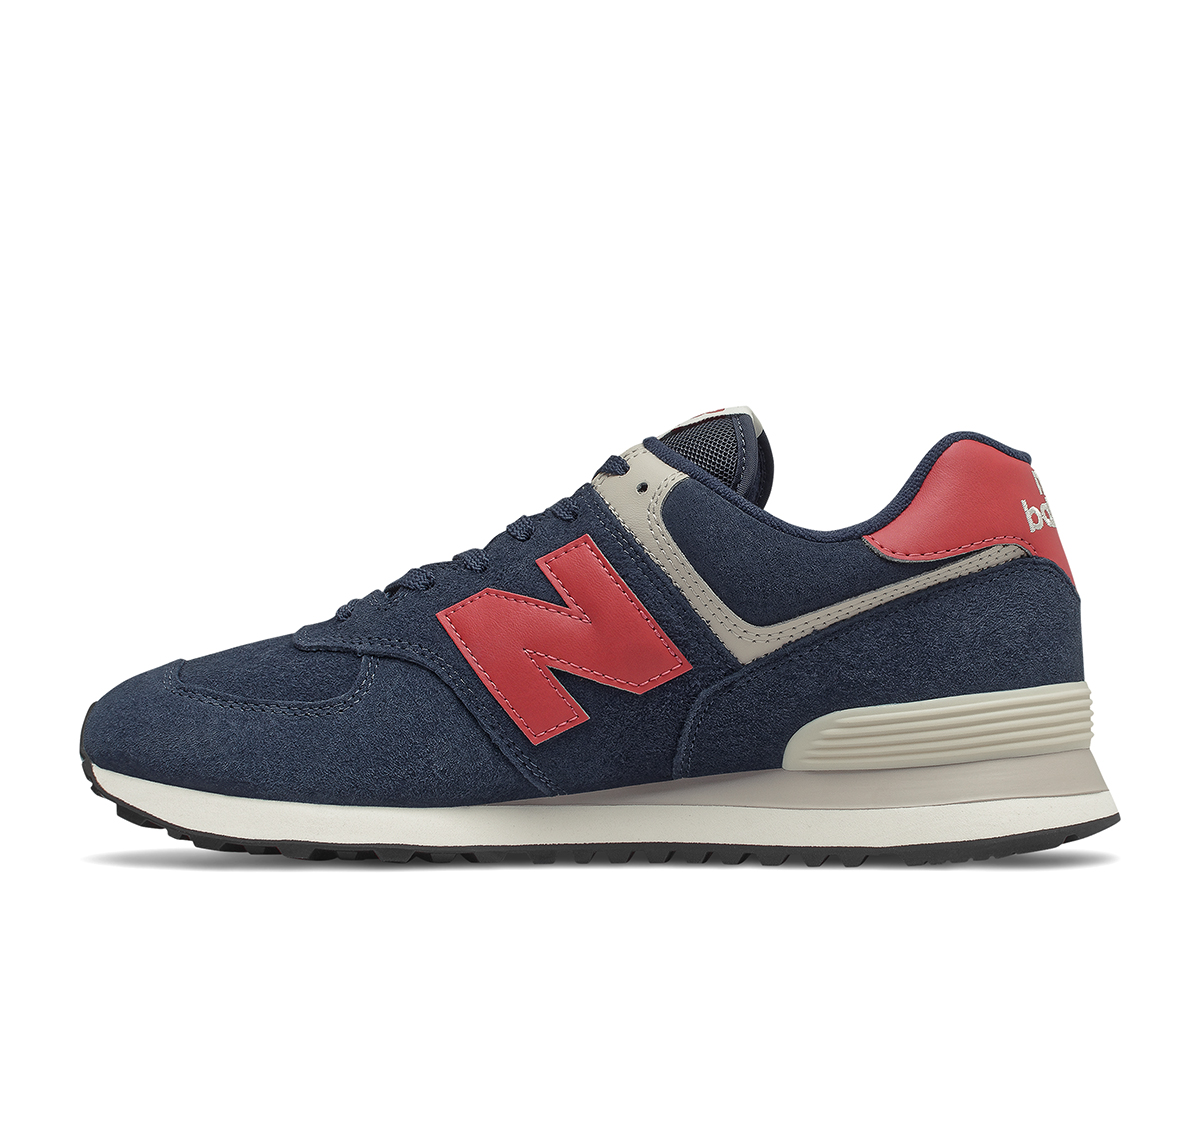 New Balance 574 - Premium Suede - Navy Red left side